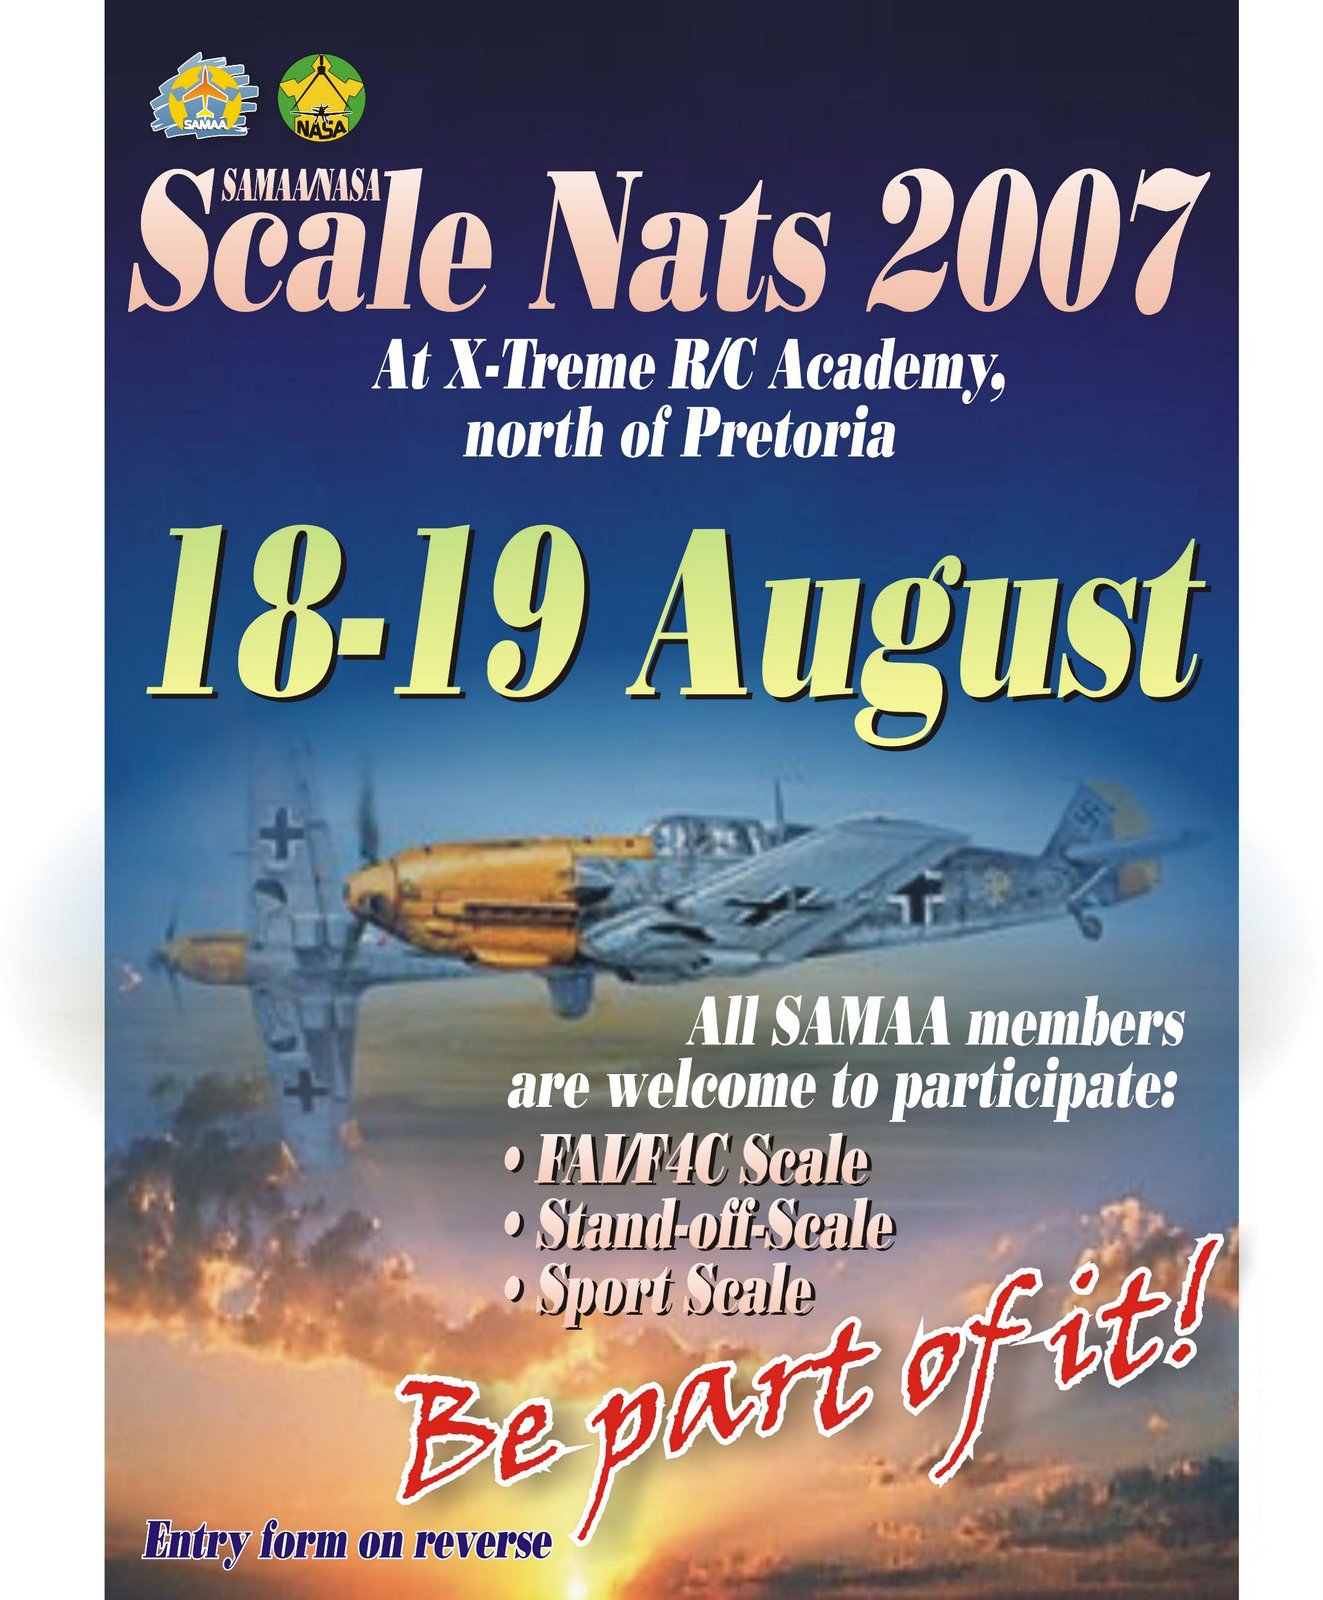 [2007_scale_nats_poster.jpg]